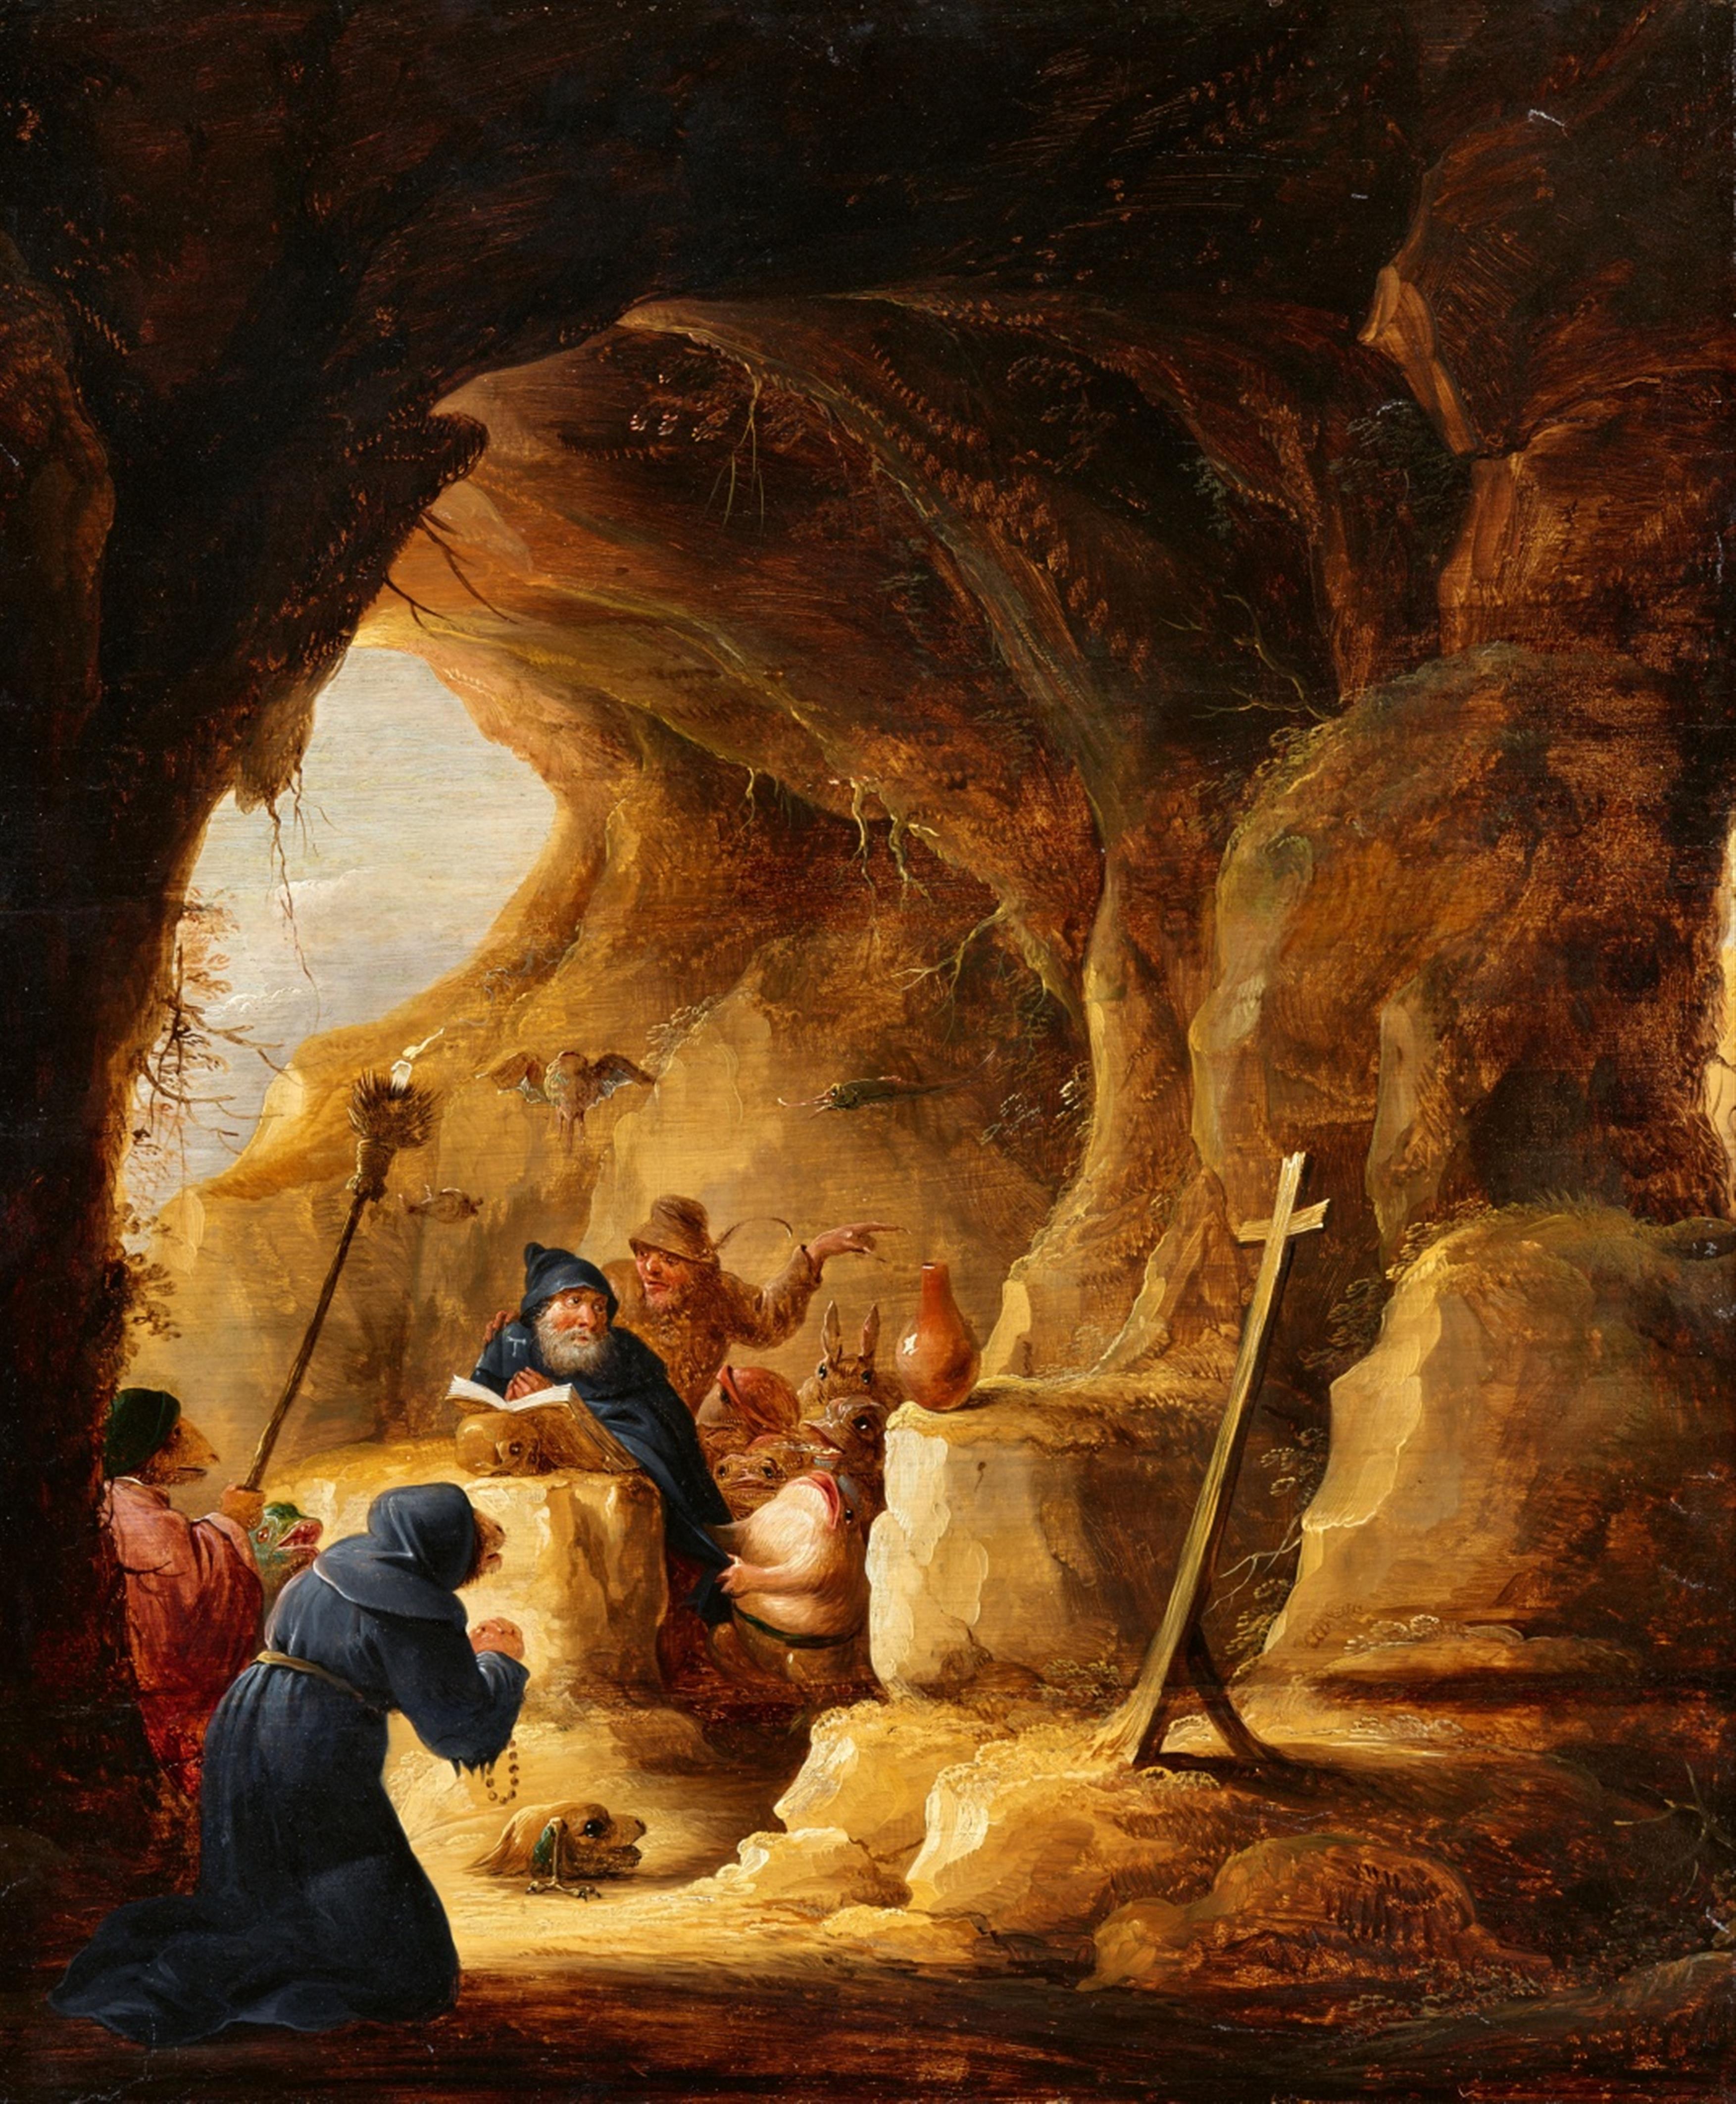 David Teniers the Younger - The Temptation of Saint Anthony - image-1